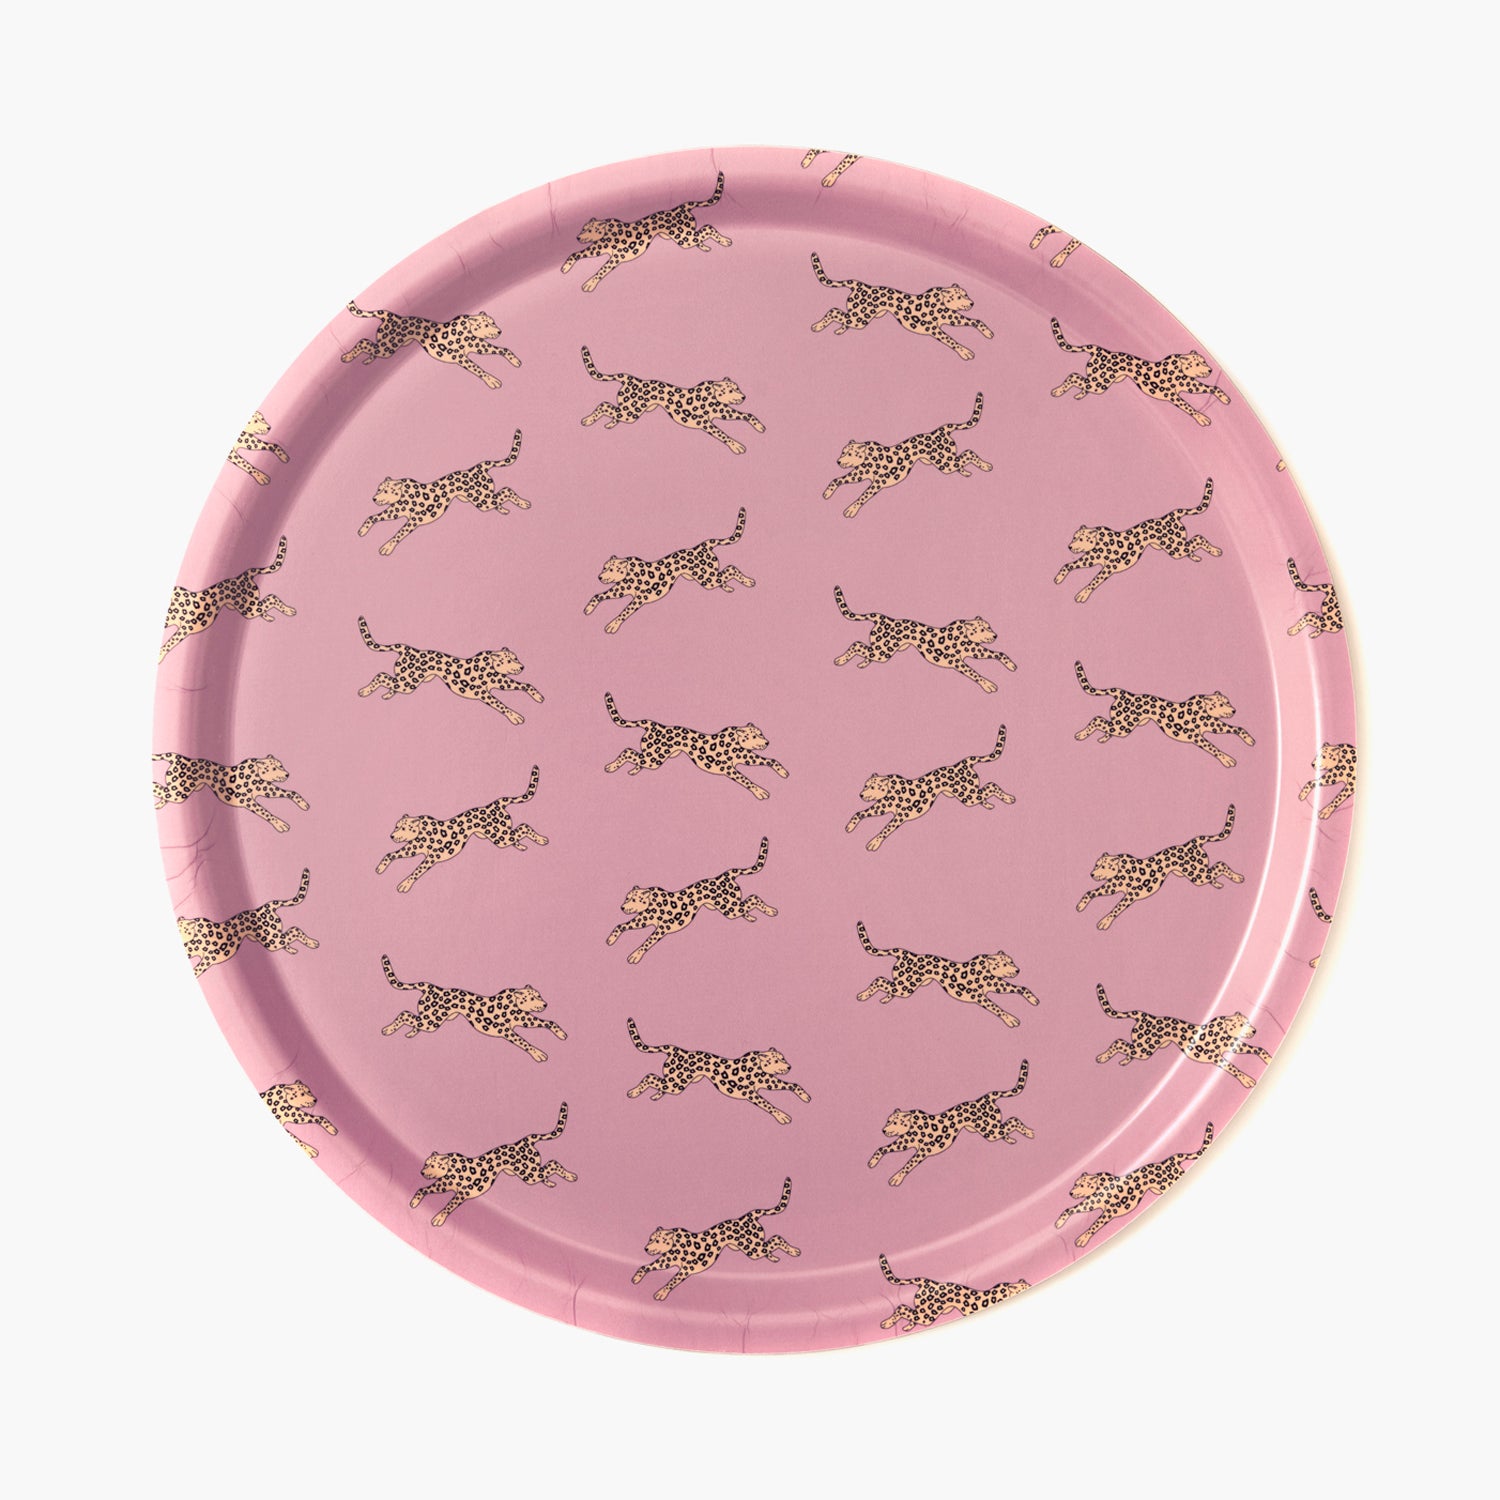 Pink & Yellow Leopard Round Serving Tray from BLU KAT in collaboration with Swedish illustrator Carin Ahlberg Giddings.